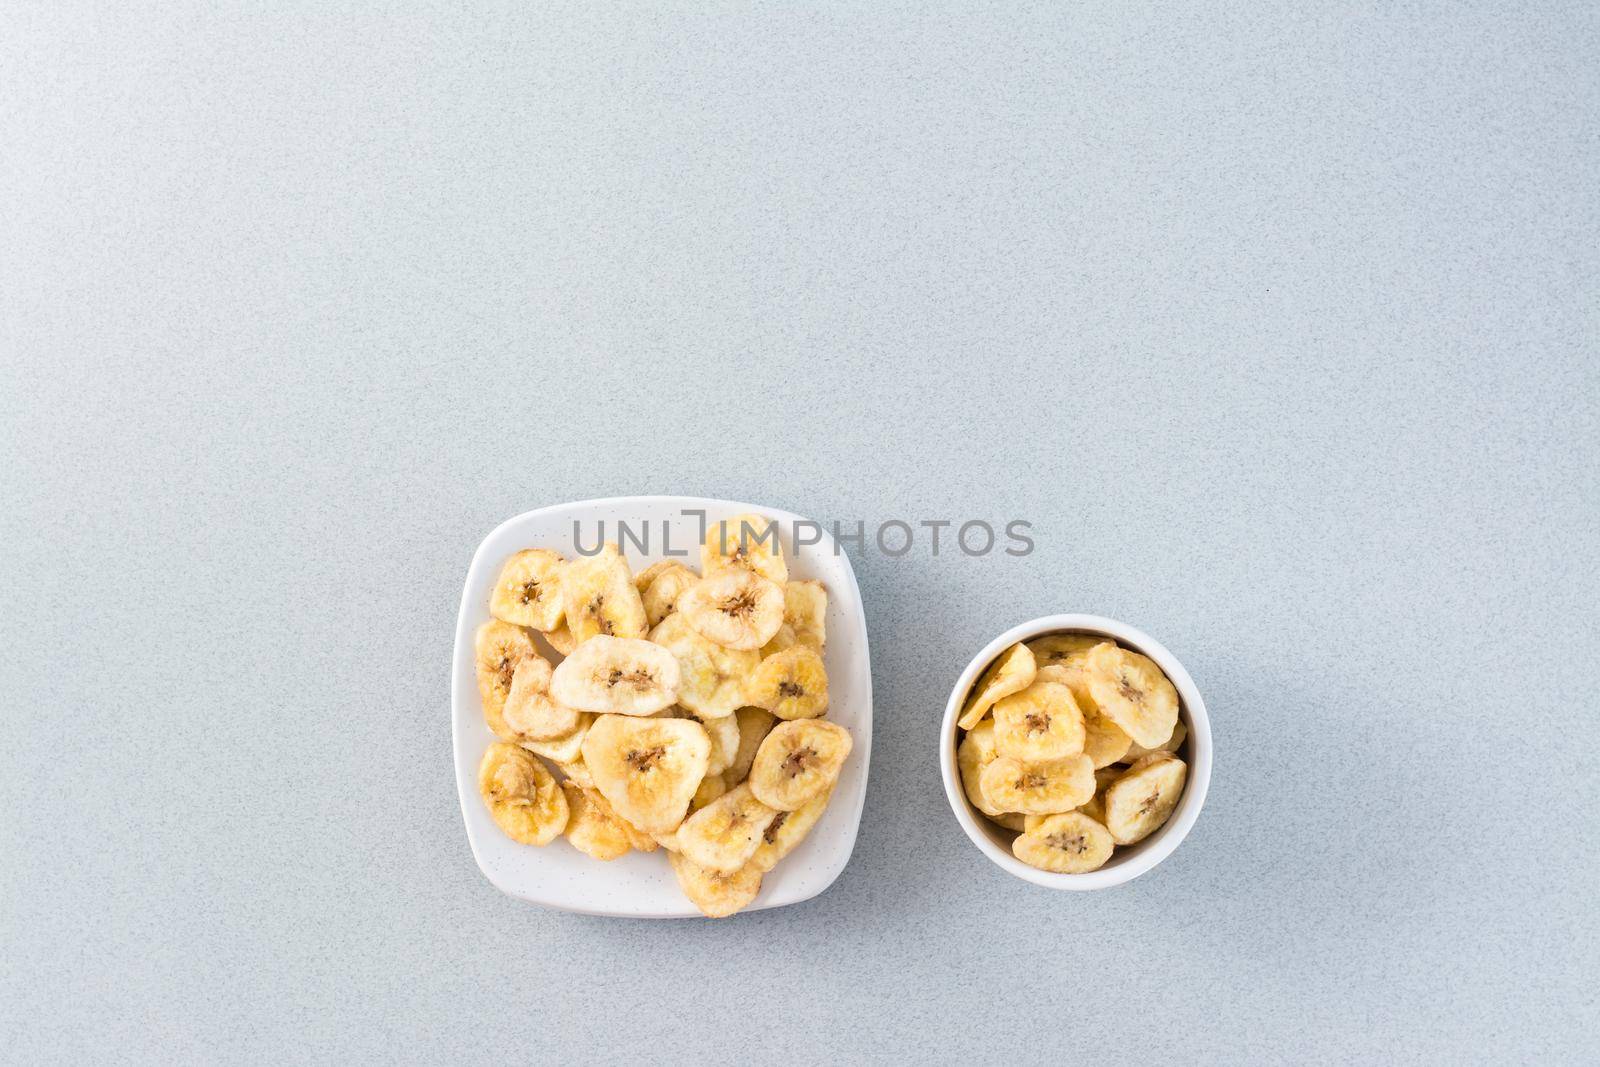 Baked banana chips in a white bowl and saucer on the table. Fast food. Web banner. Top view. Close-up